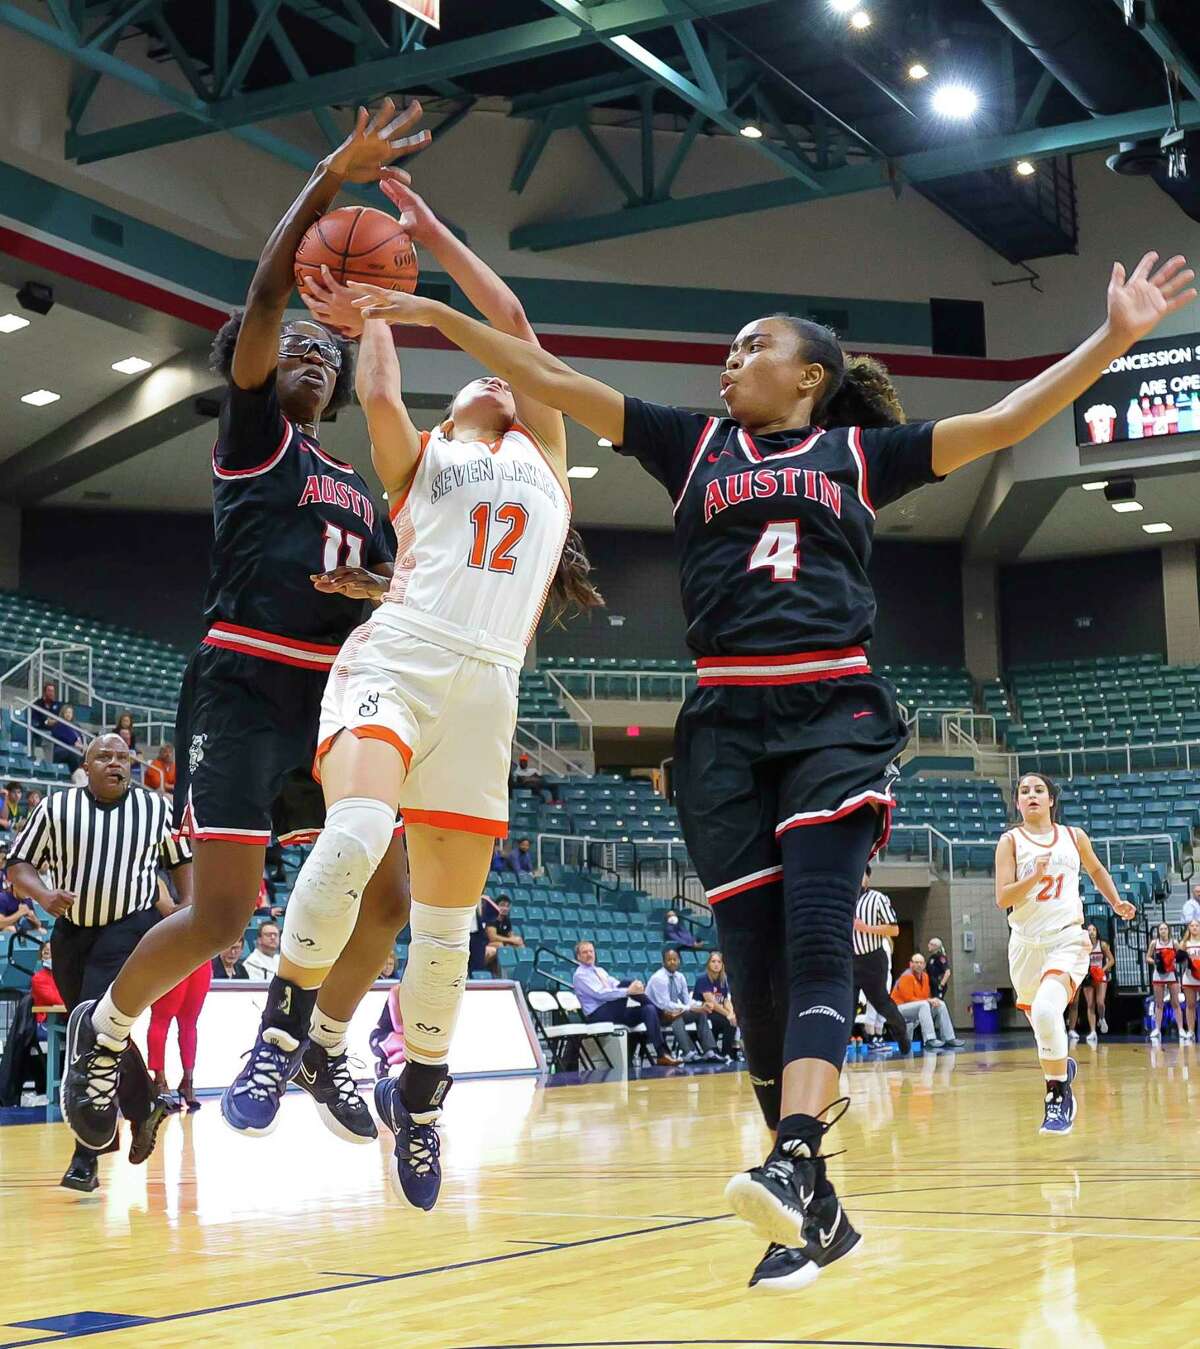 Seven Lakes guard Cailyn Tucker is defended by Austin forward Kelechi Dike (11) and guard Aminah Dixon (4) during the first half of a Region III-6A quarterfinals game between the Seven Lakes Spartans and Austin Bulldogs, Tuesday, Feb. 22, 2022, at the Merrell Center in Katy.